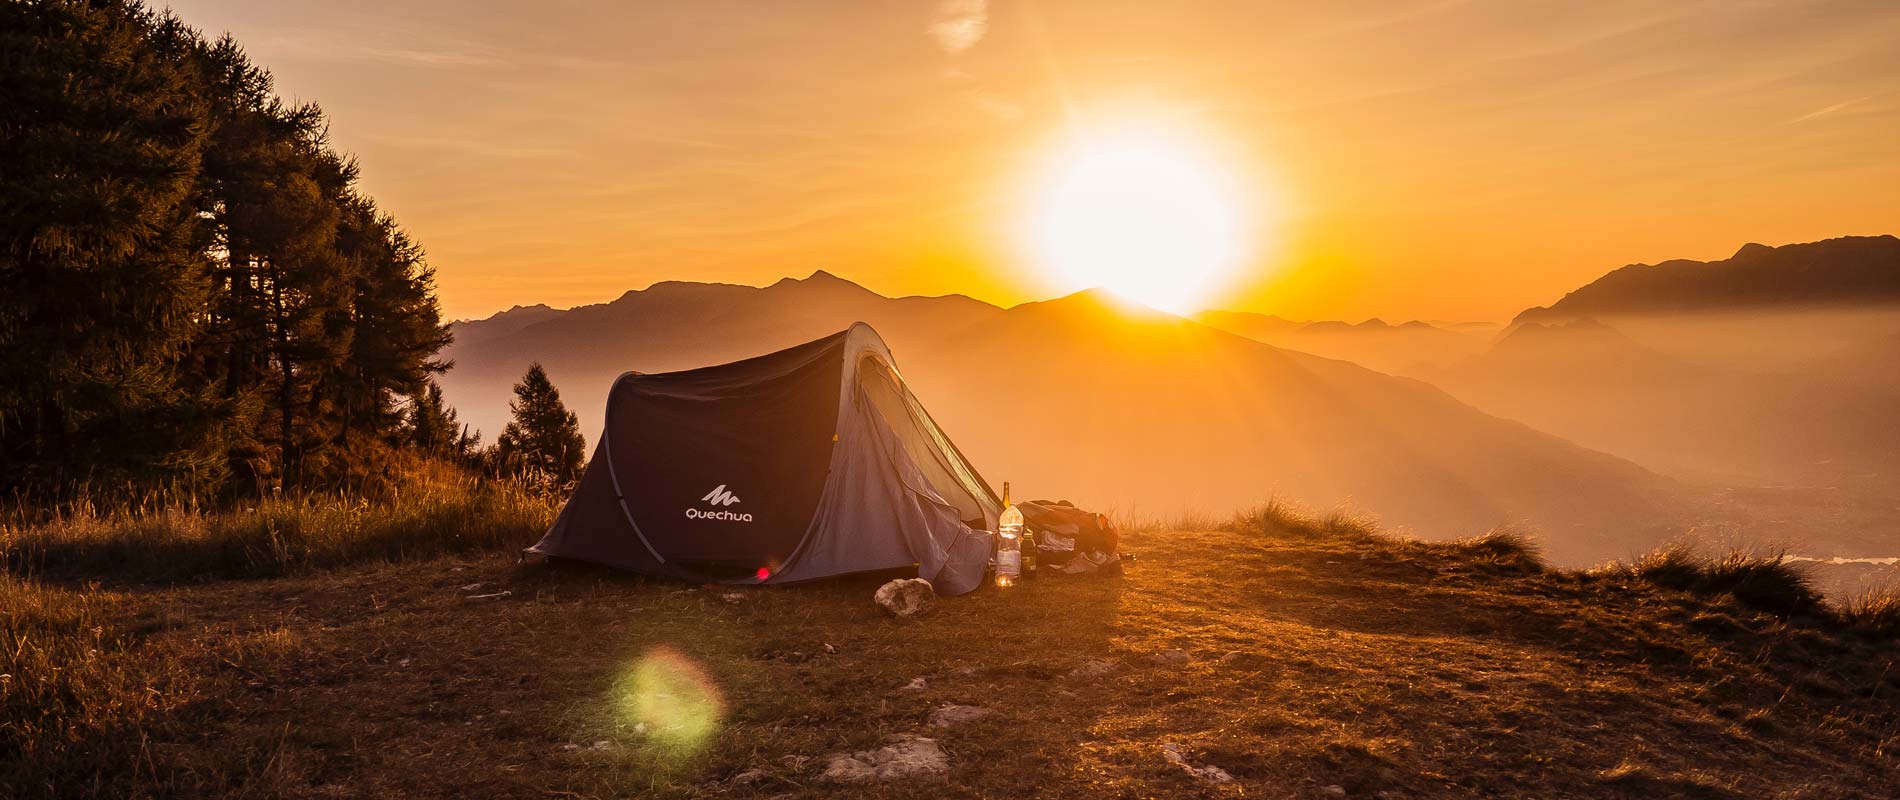 Sunrise over distant mountains with tent in the foreground next to a collection of pine trees